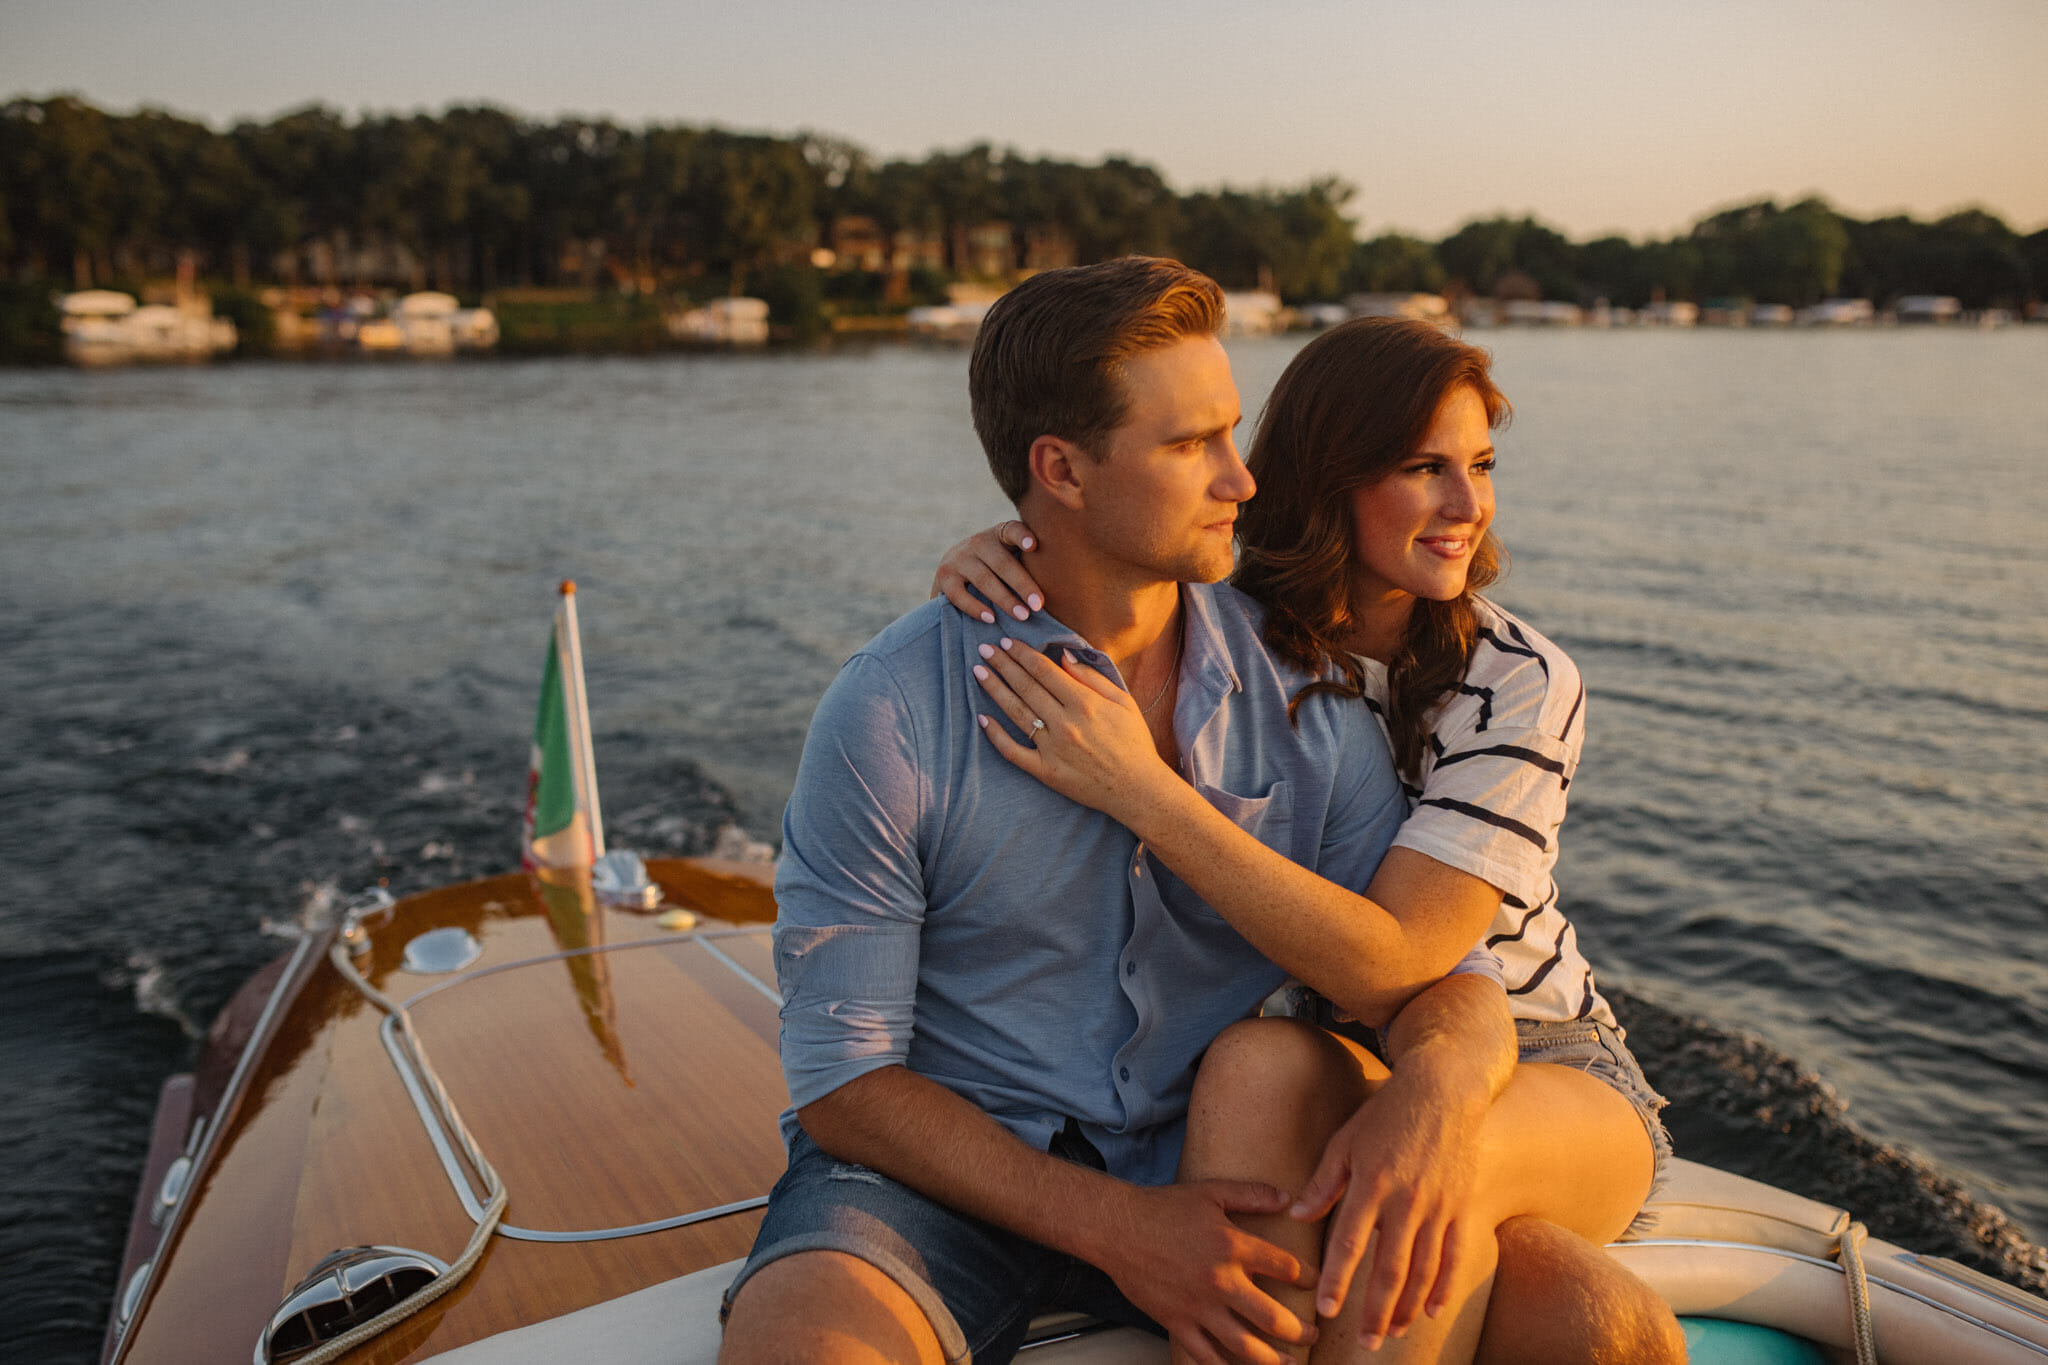 Engagement photos of a couple on a wooden boat in Okoboji, Iowa